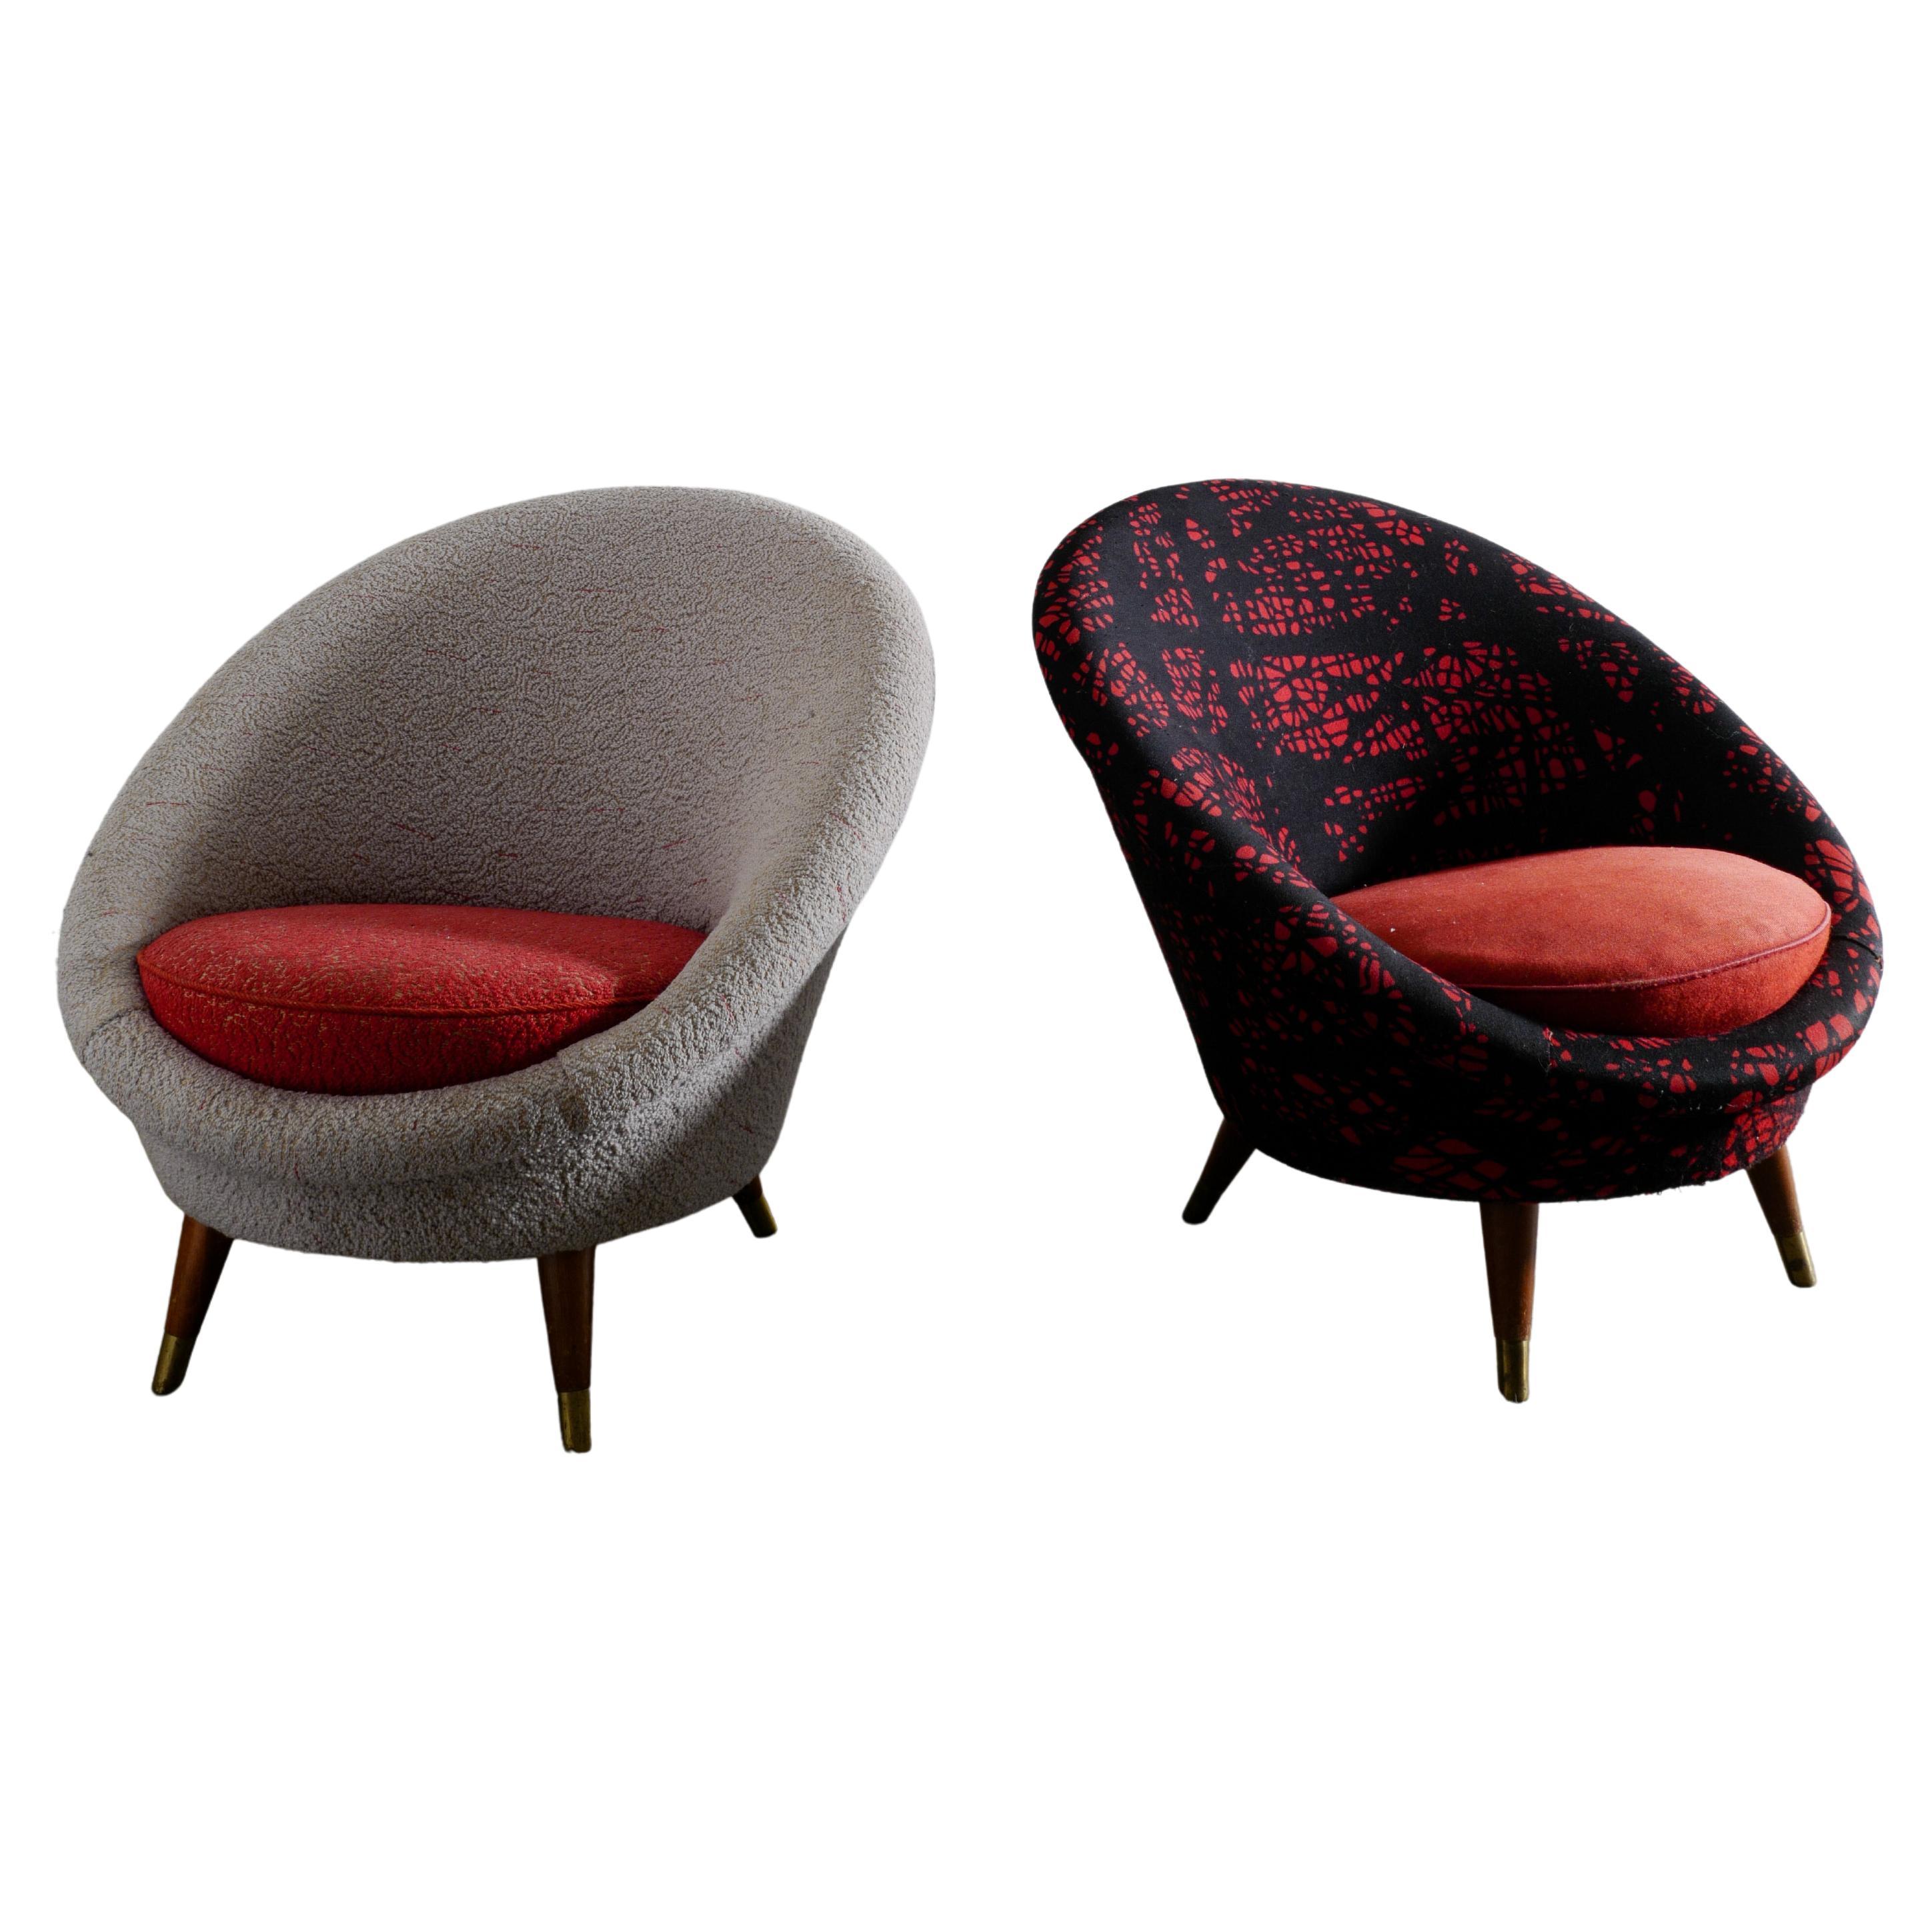 Vatne "Florida" Easy Egg Chairs  Produced in Norway, 1950s